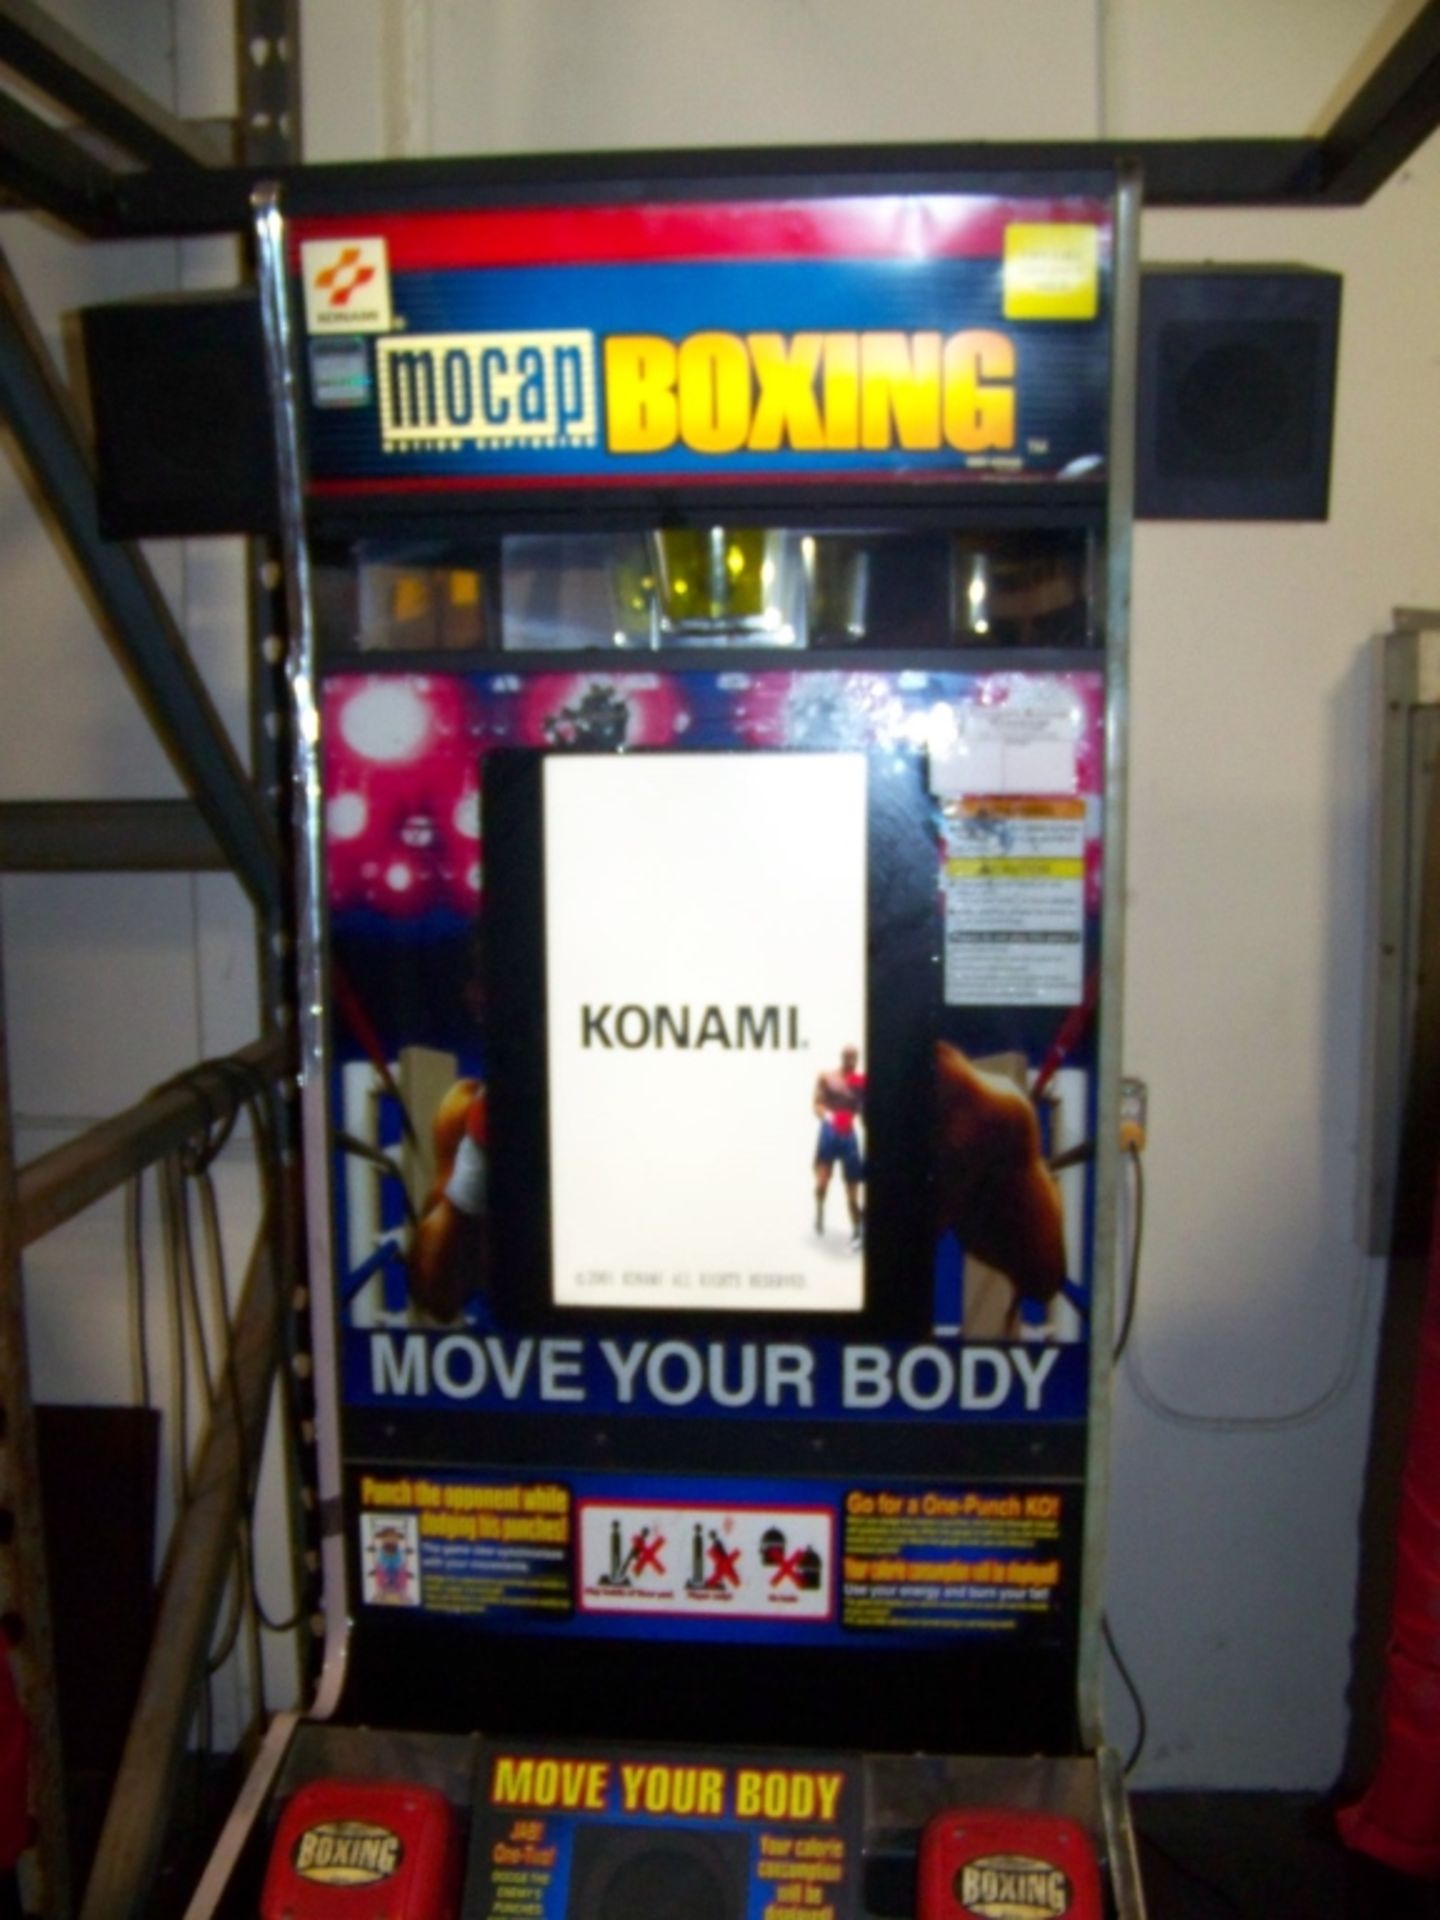 MOCAP BOXING SPORTS ARCADE GAME KONAMI Item is in used condition. Evidence of wear and commercial - Image 7 of 7